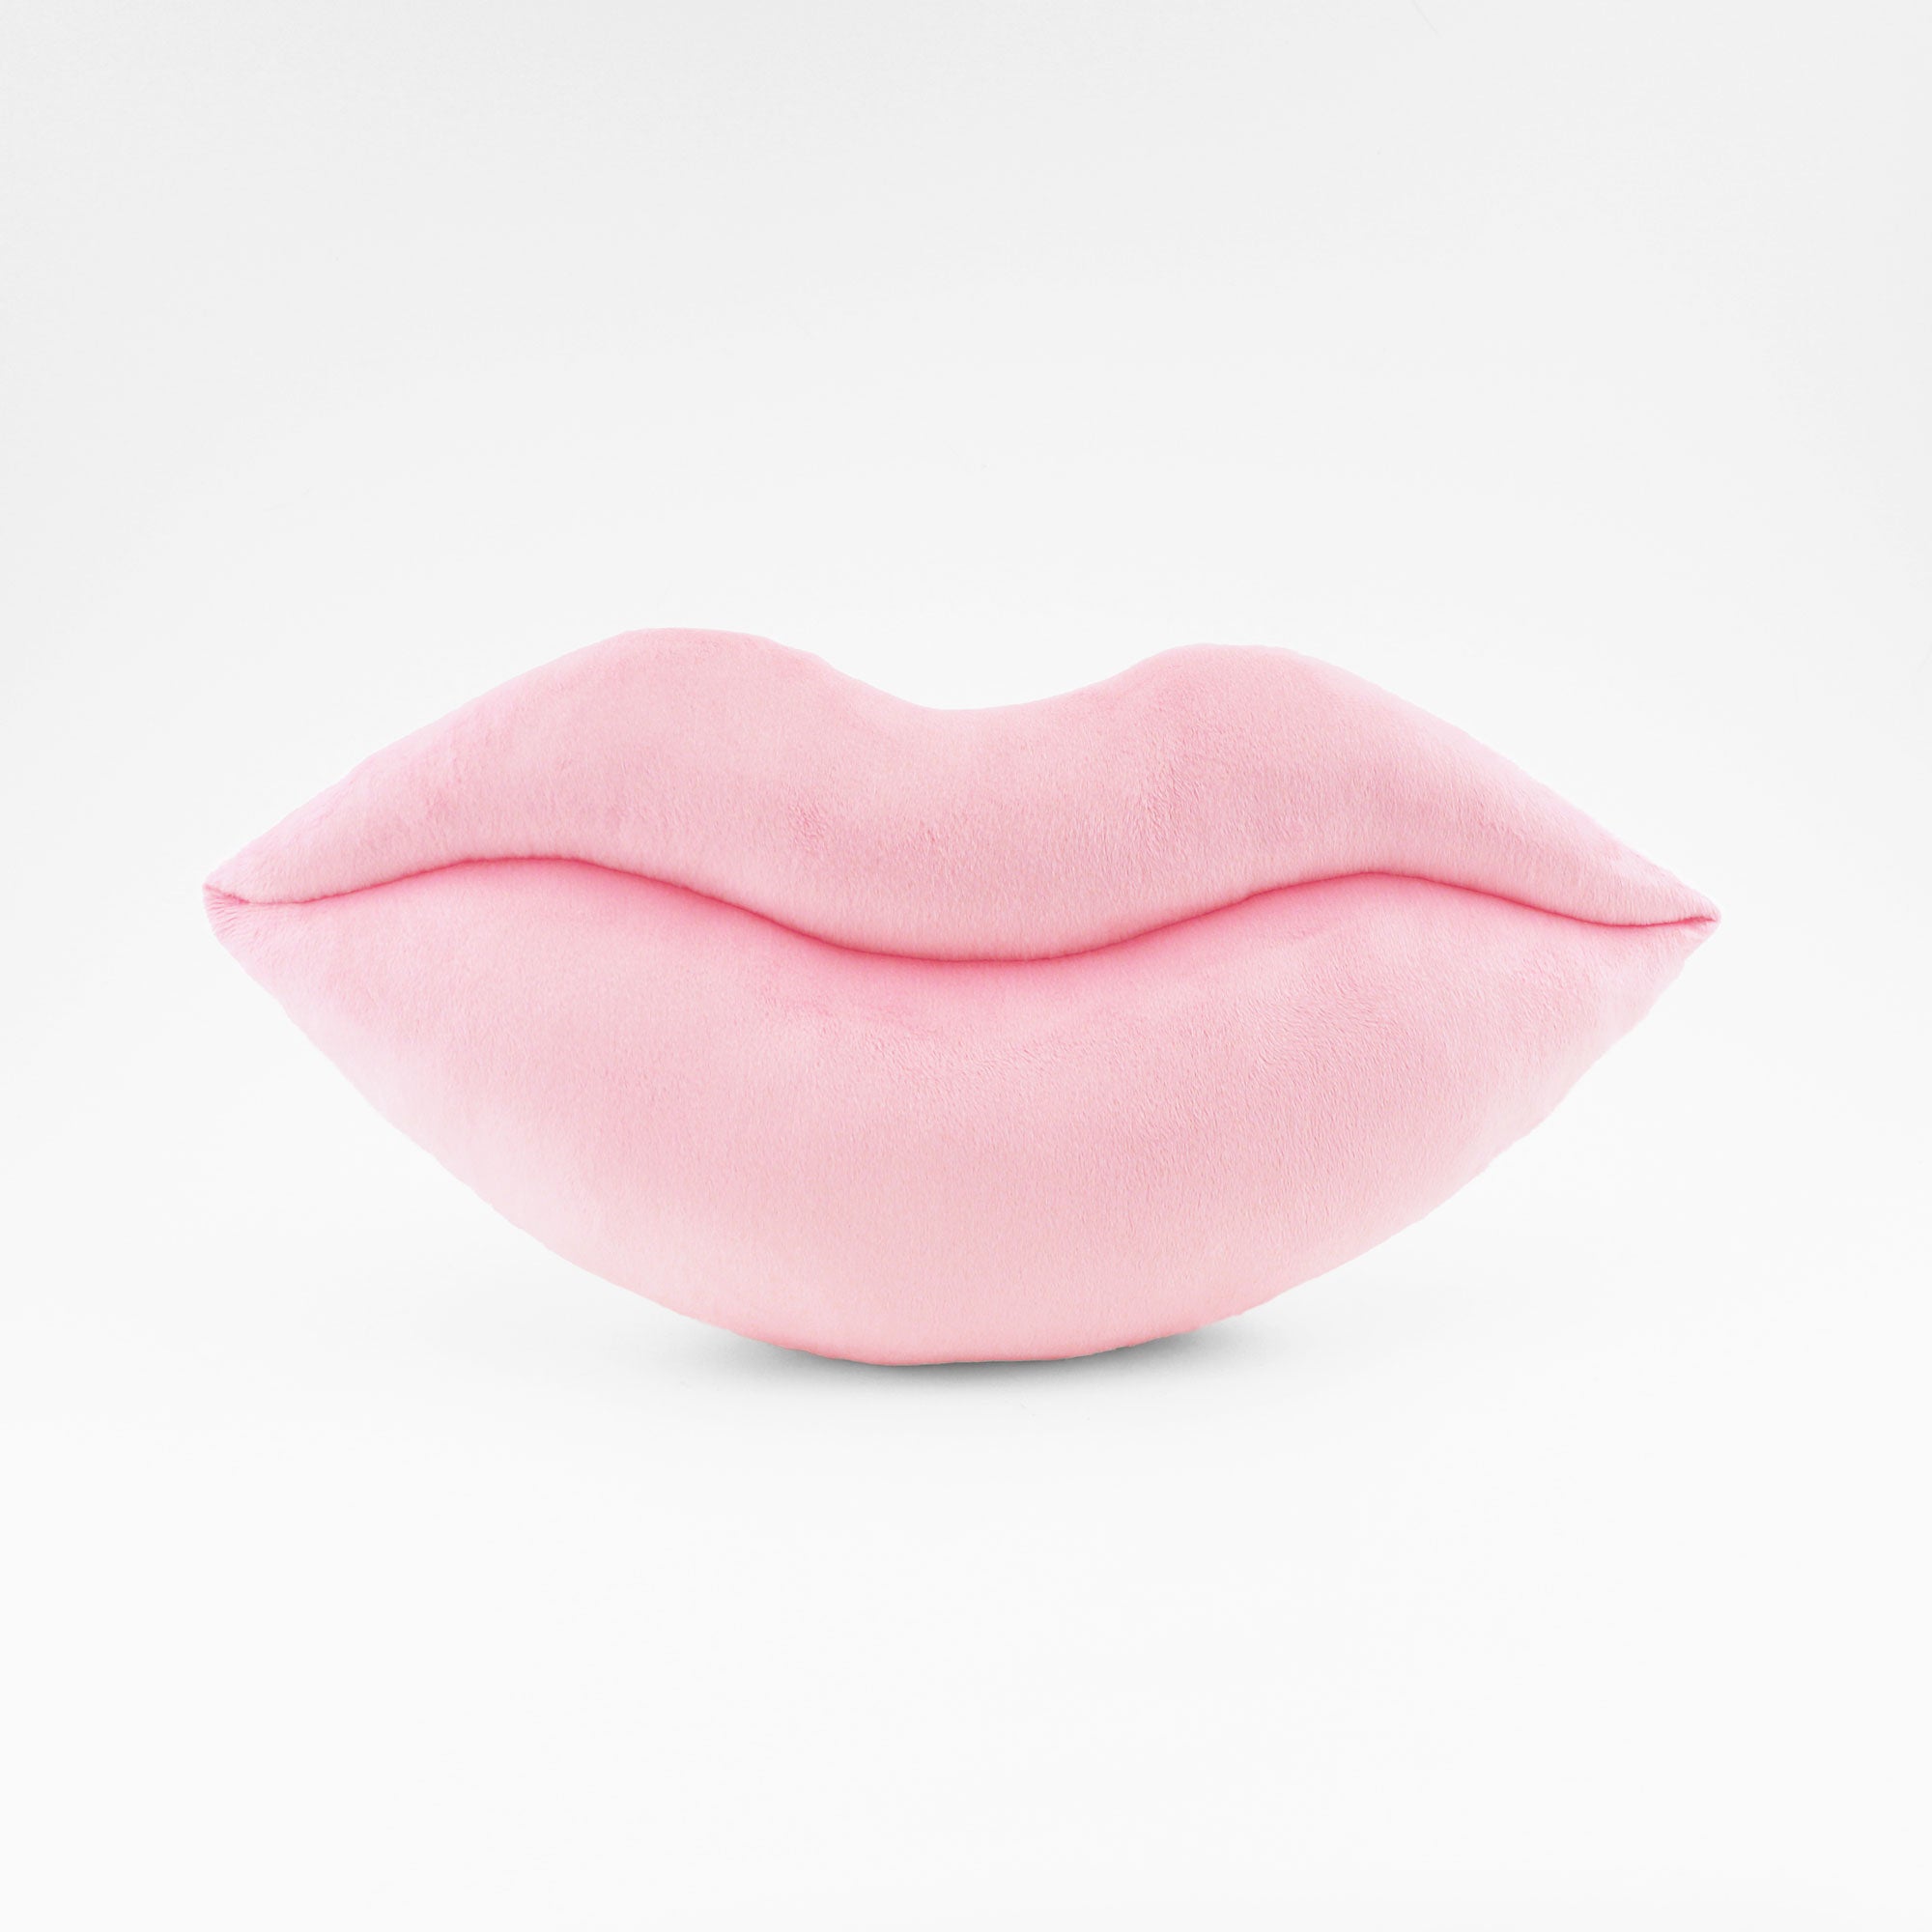 Light Baby Pink lips shaped decorative throw pillow.